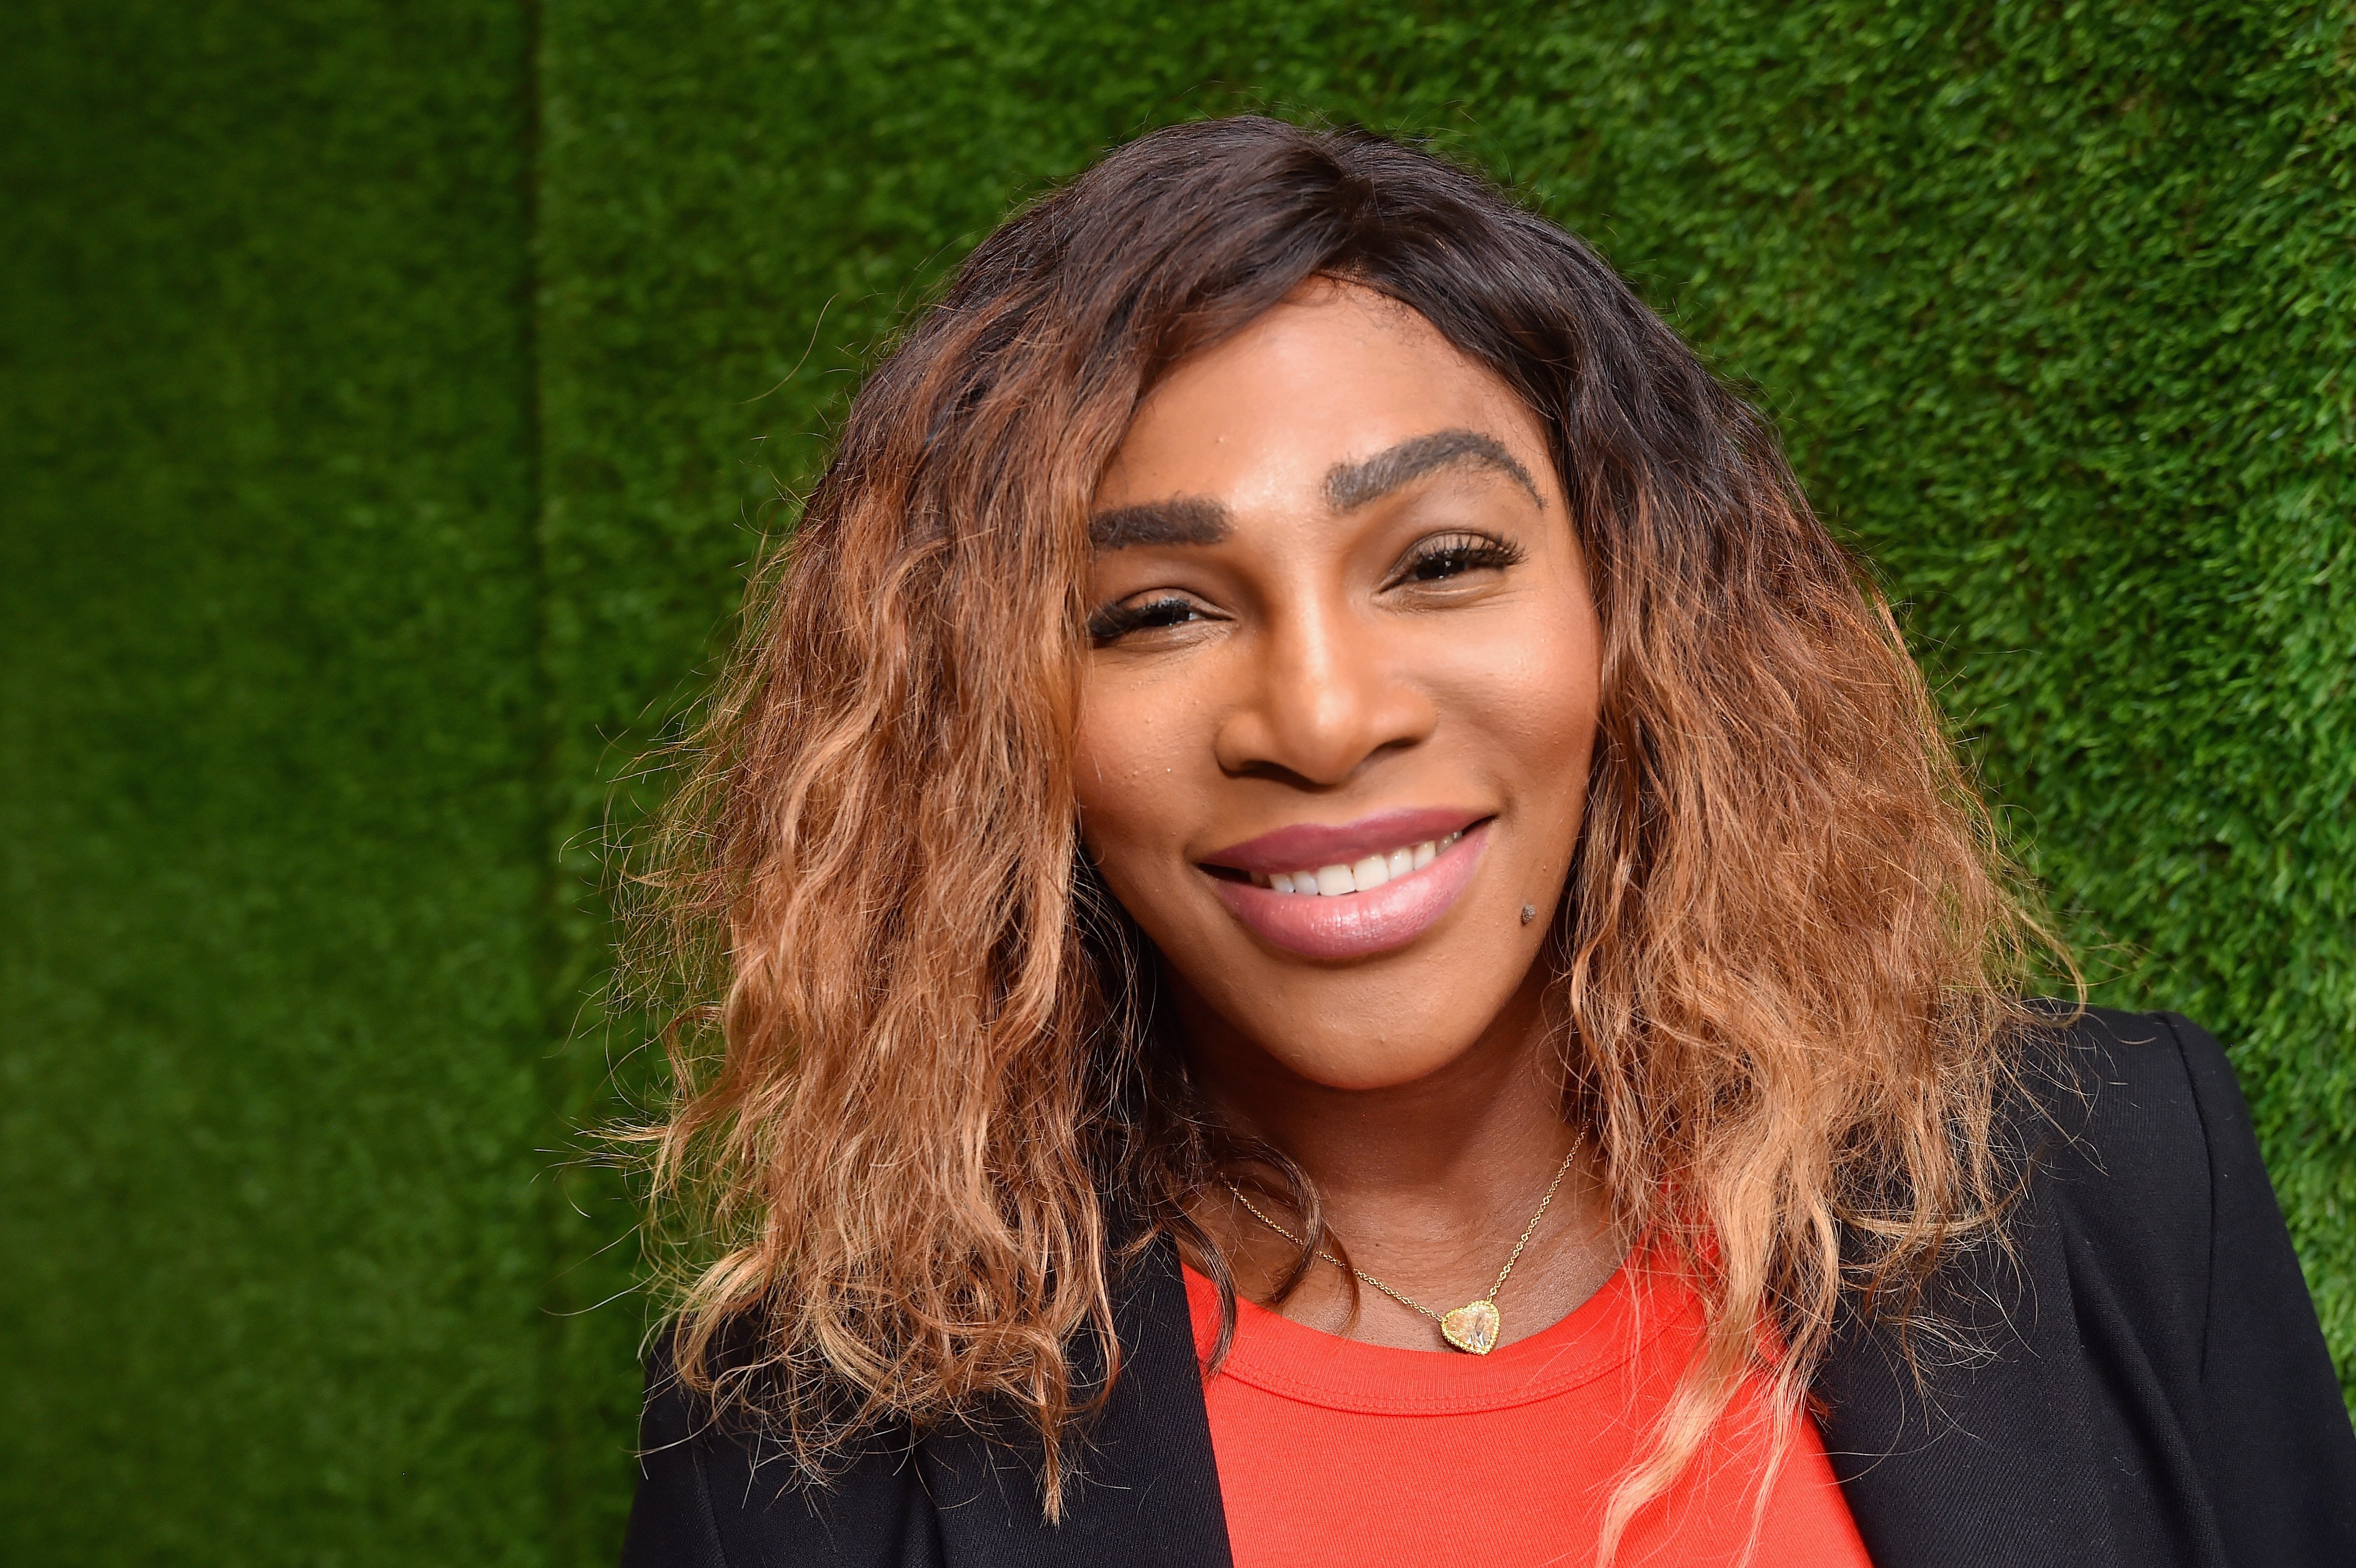 Serena Williams attends the BoF West summit at Westfield Century City on April 26, 2019 in California| Photo: Getty Images